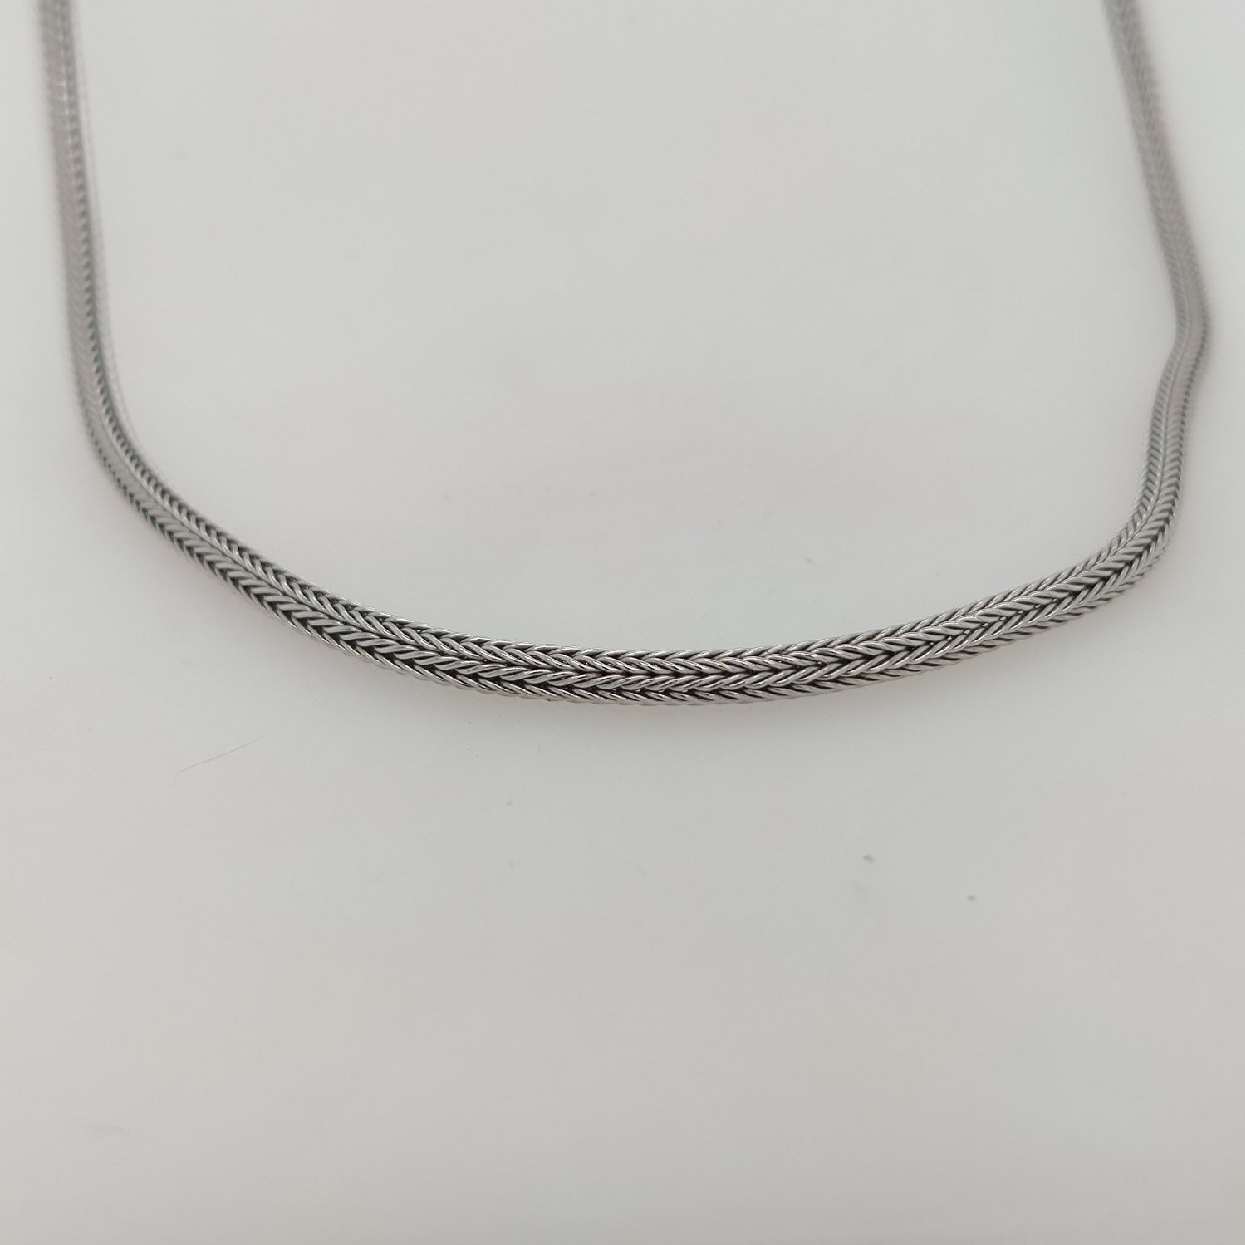 14K White Gold 3mm Foxtail Chain; 18 inches